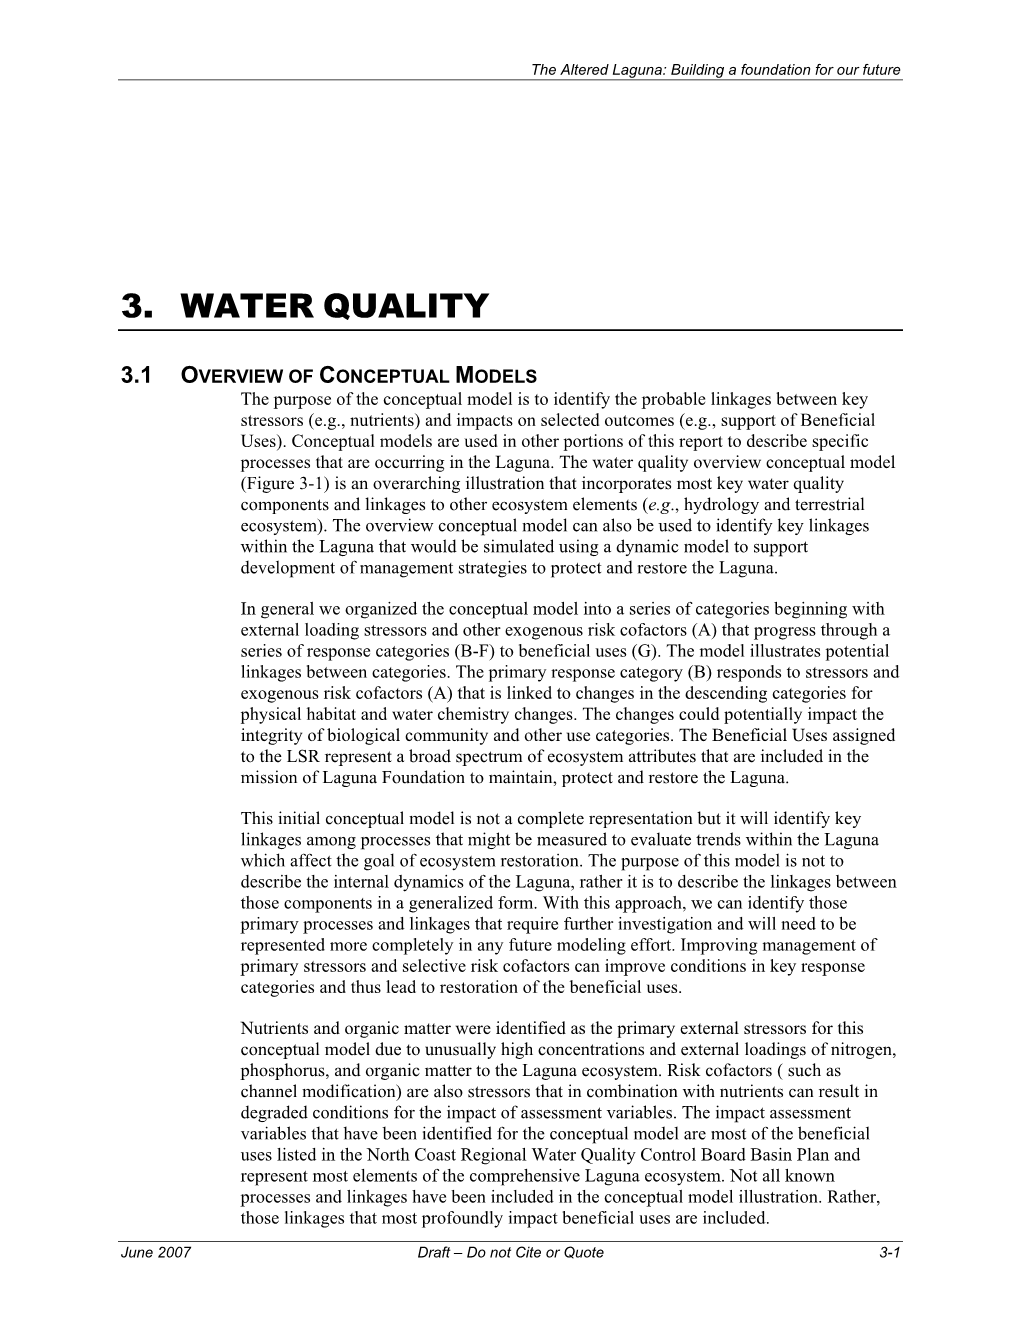 3. Water Quality